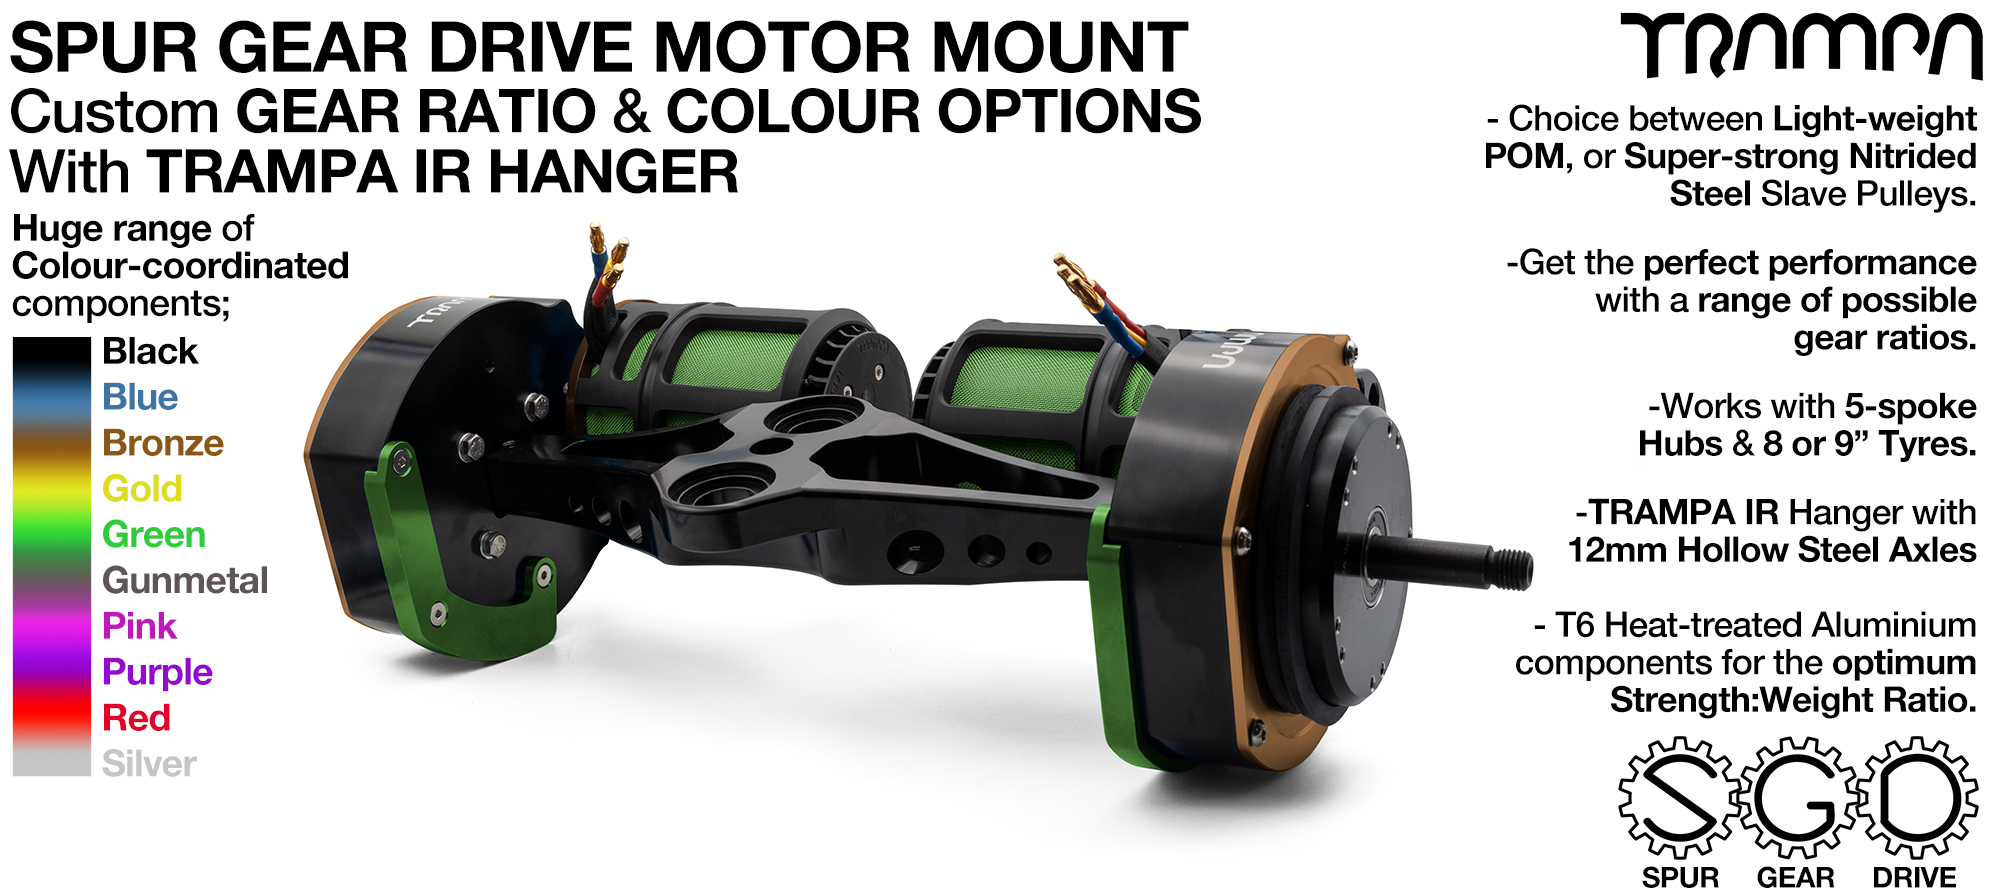 Mountainboard Spur Gear Drive TWIN with PULLEYS & FILTERS Mounted on a TRAMPA IR Hanger 